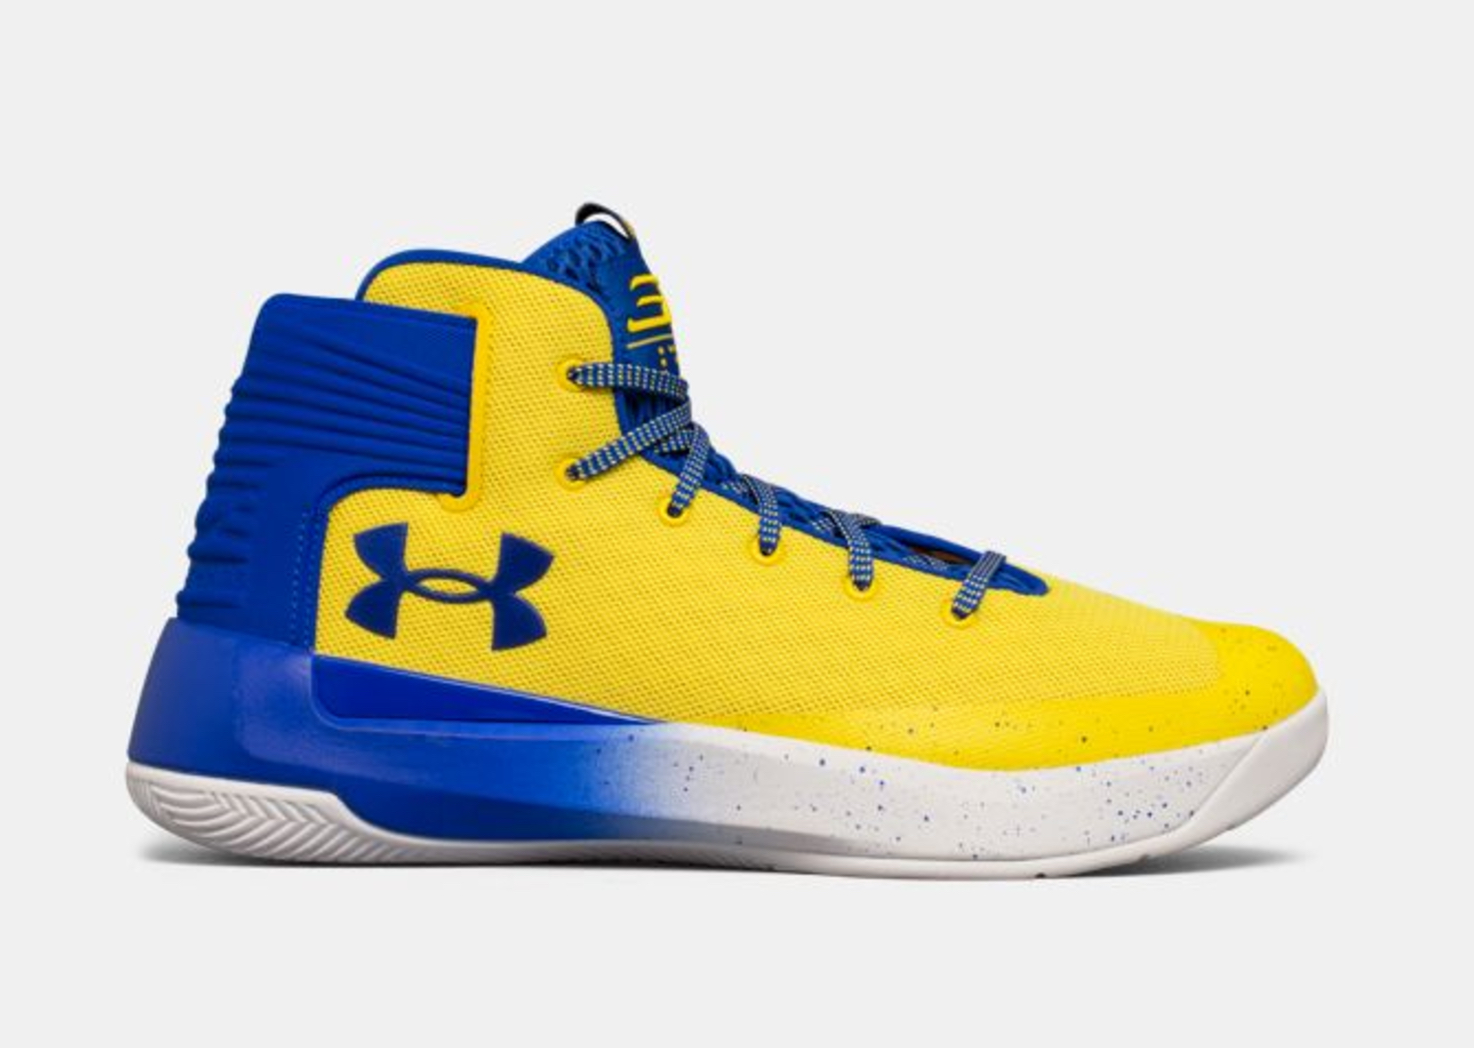 Under Armour Launches the Latest Curry 3ZER0 'Taxi' - WearTesters